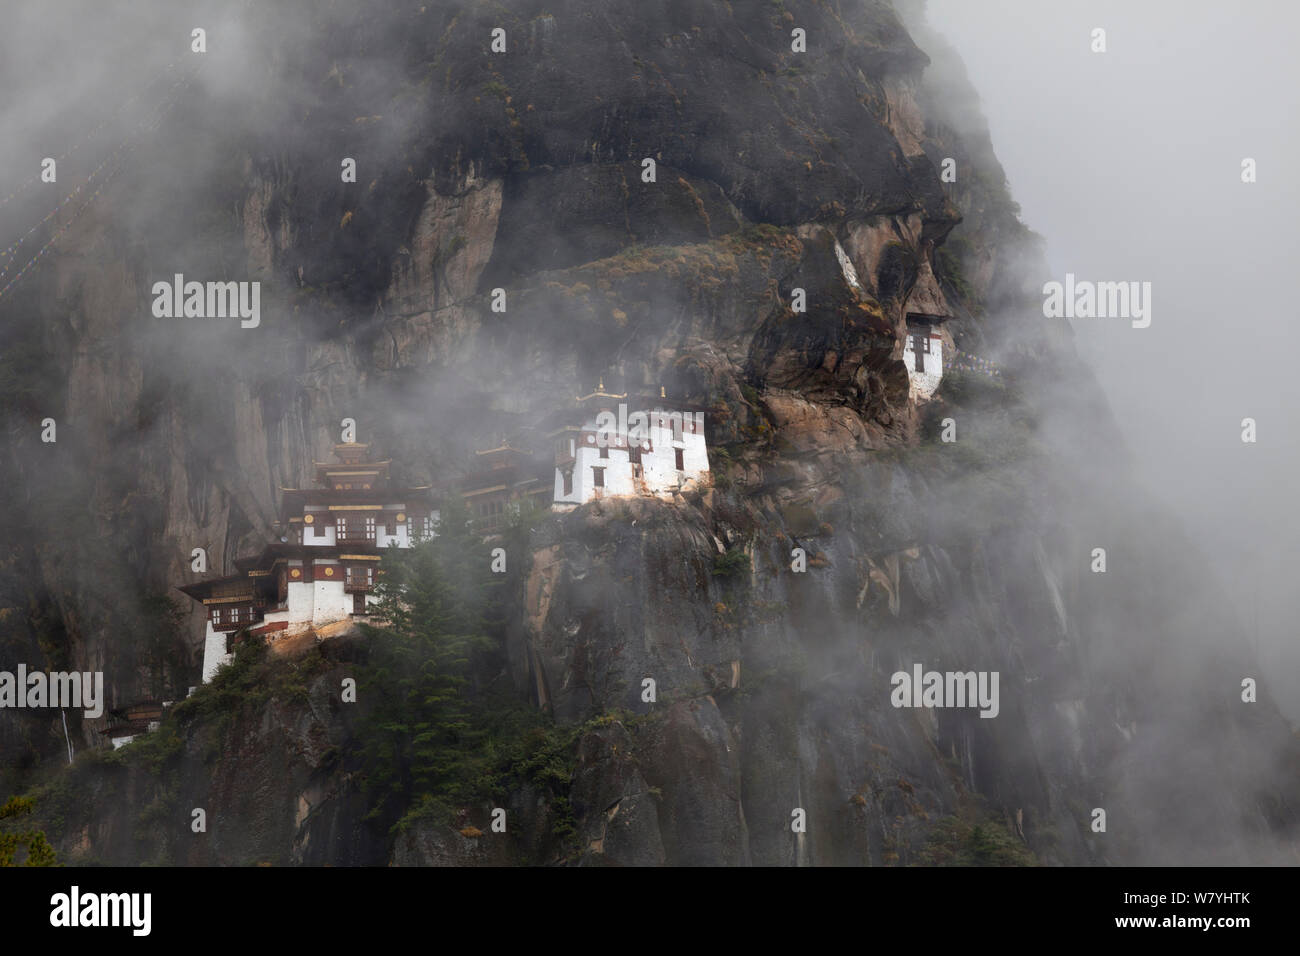 The Tiger&#39;s Nest Monastery on a rocky mountainside near the town of Paro. Bhutan, October 2014. Stock Photo